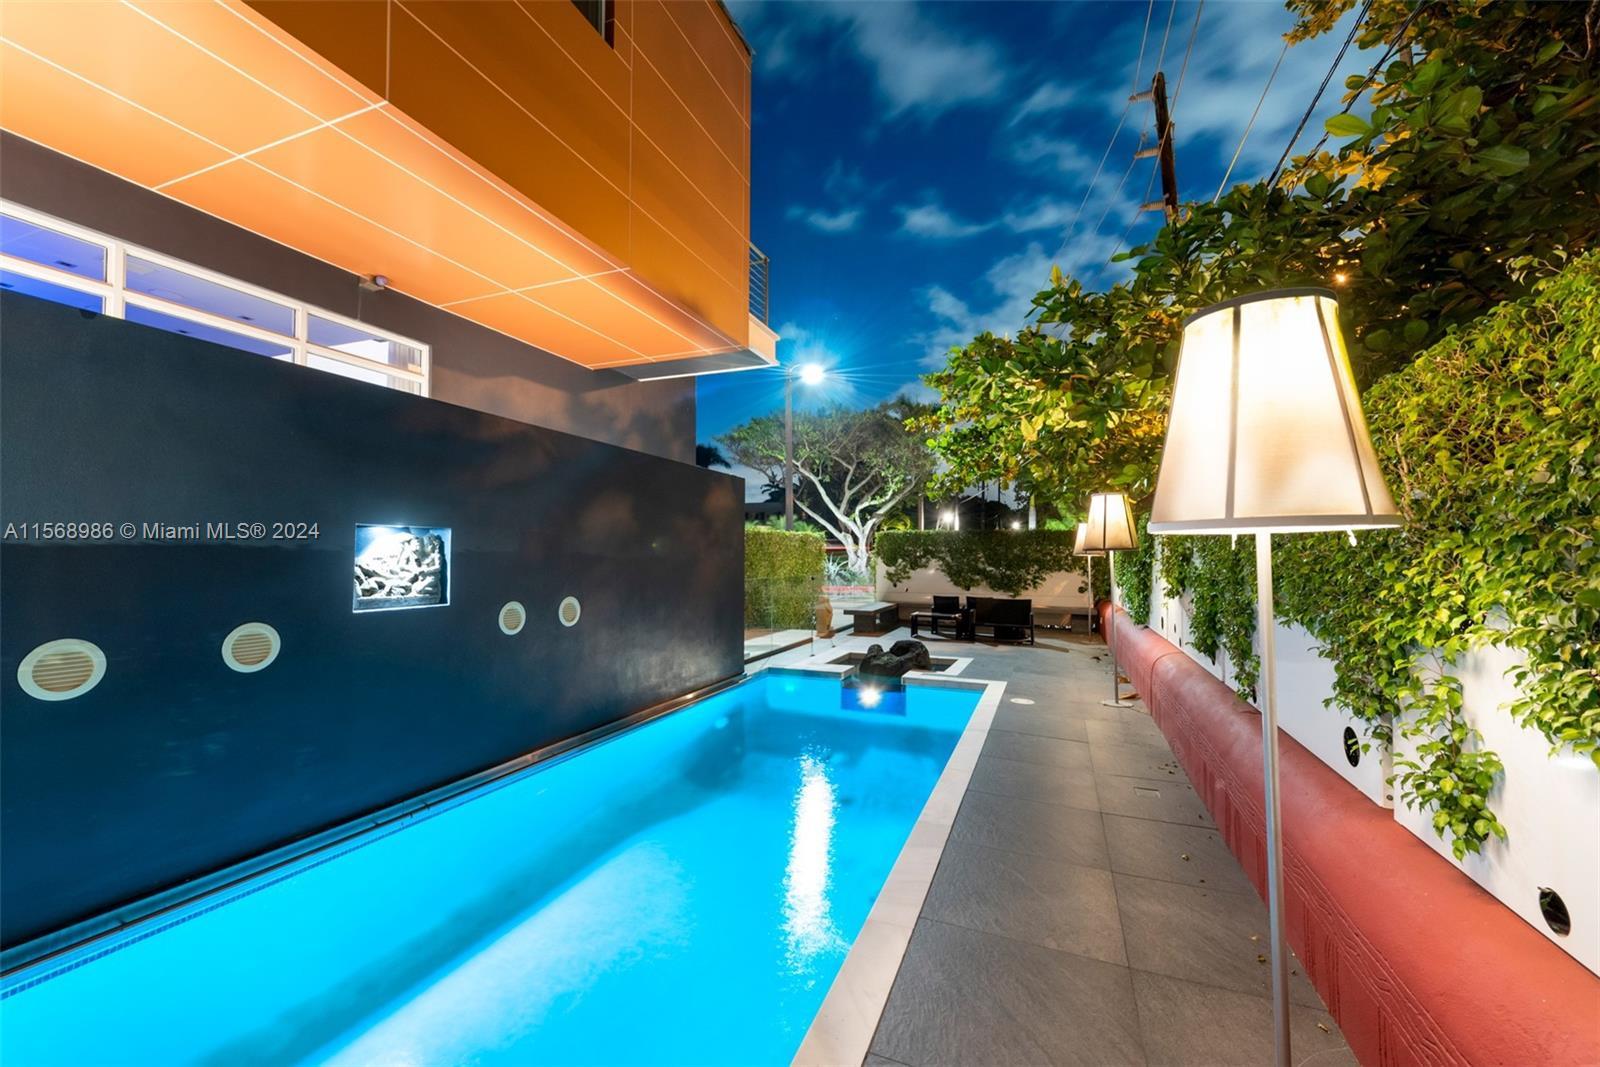 Modern living is at its best with this beautiful home nestled on South Bayshore Drive, one of Miami’